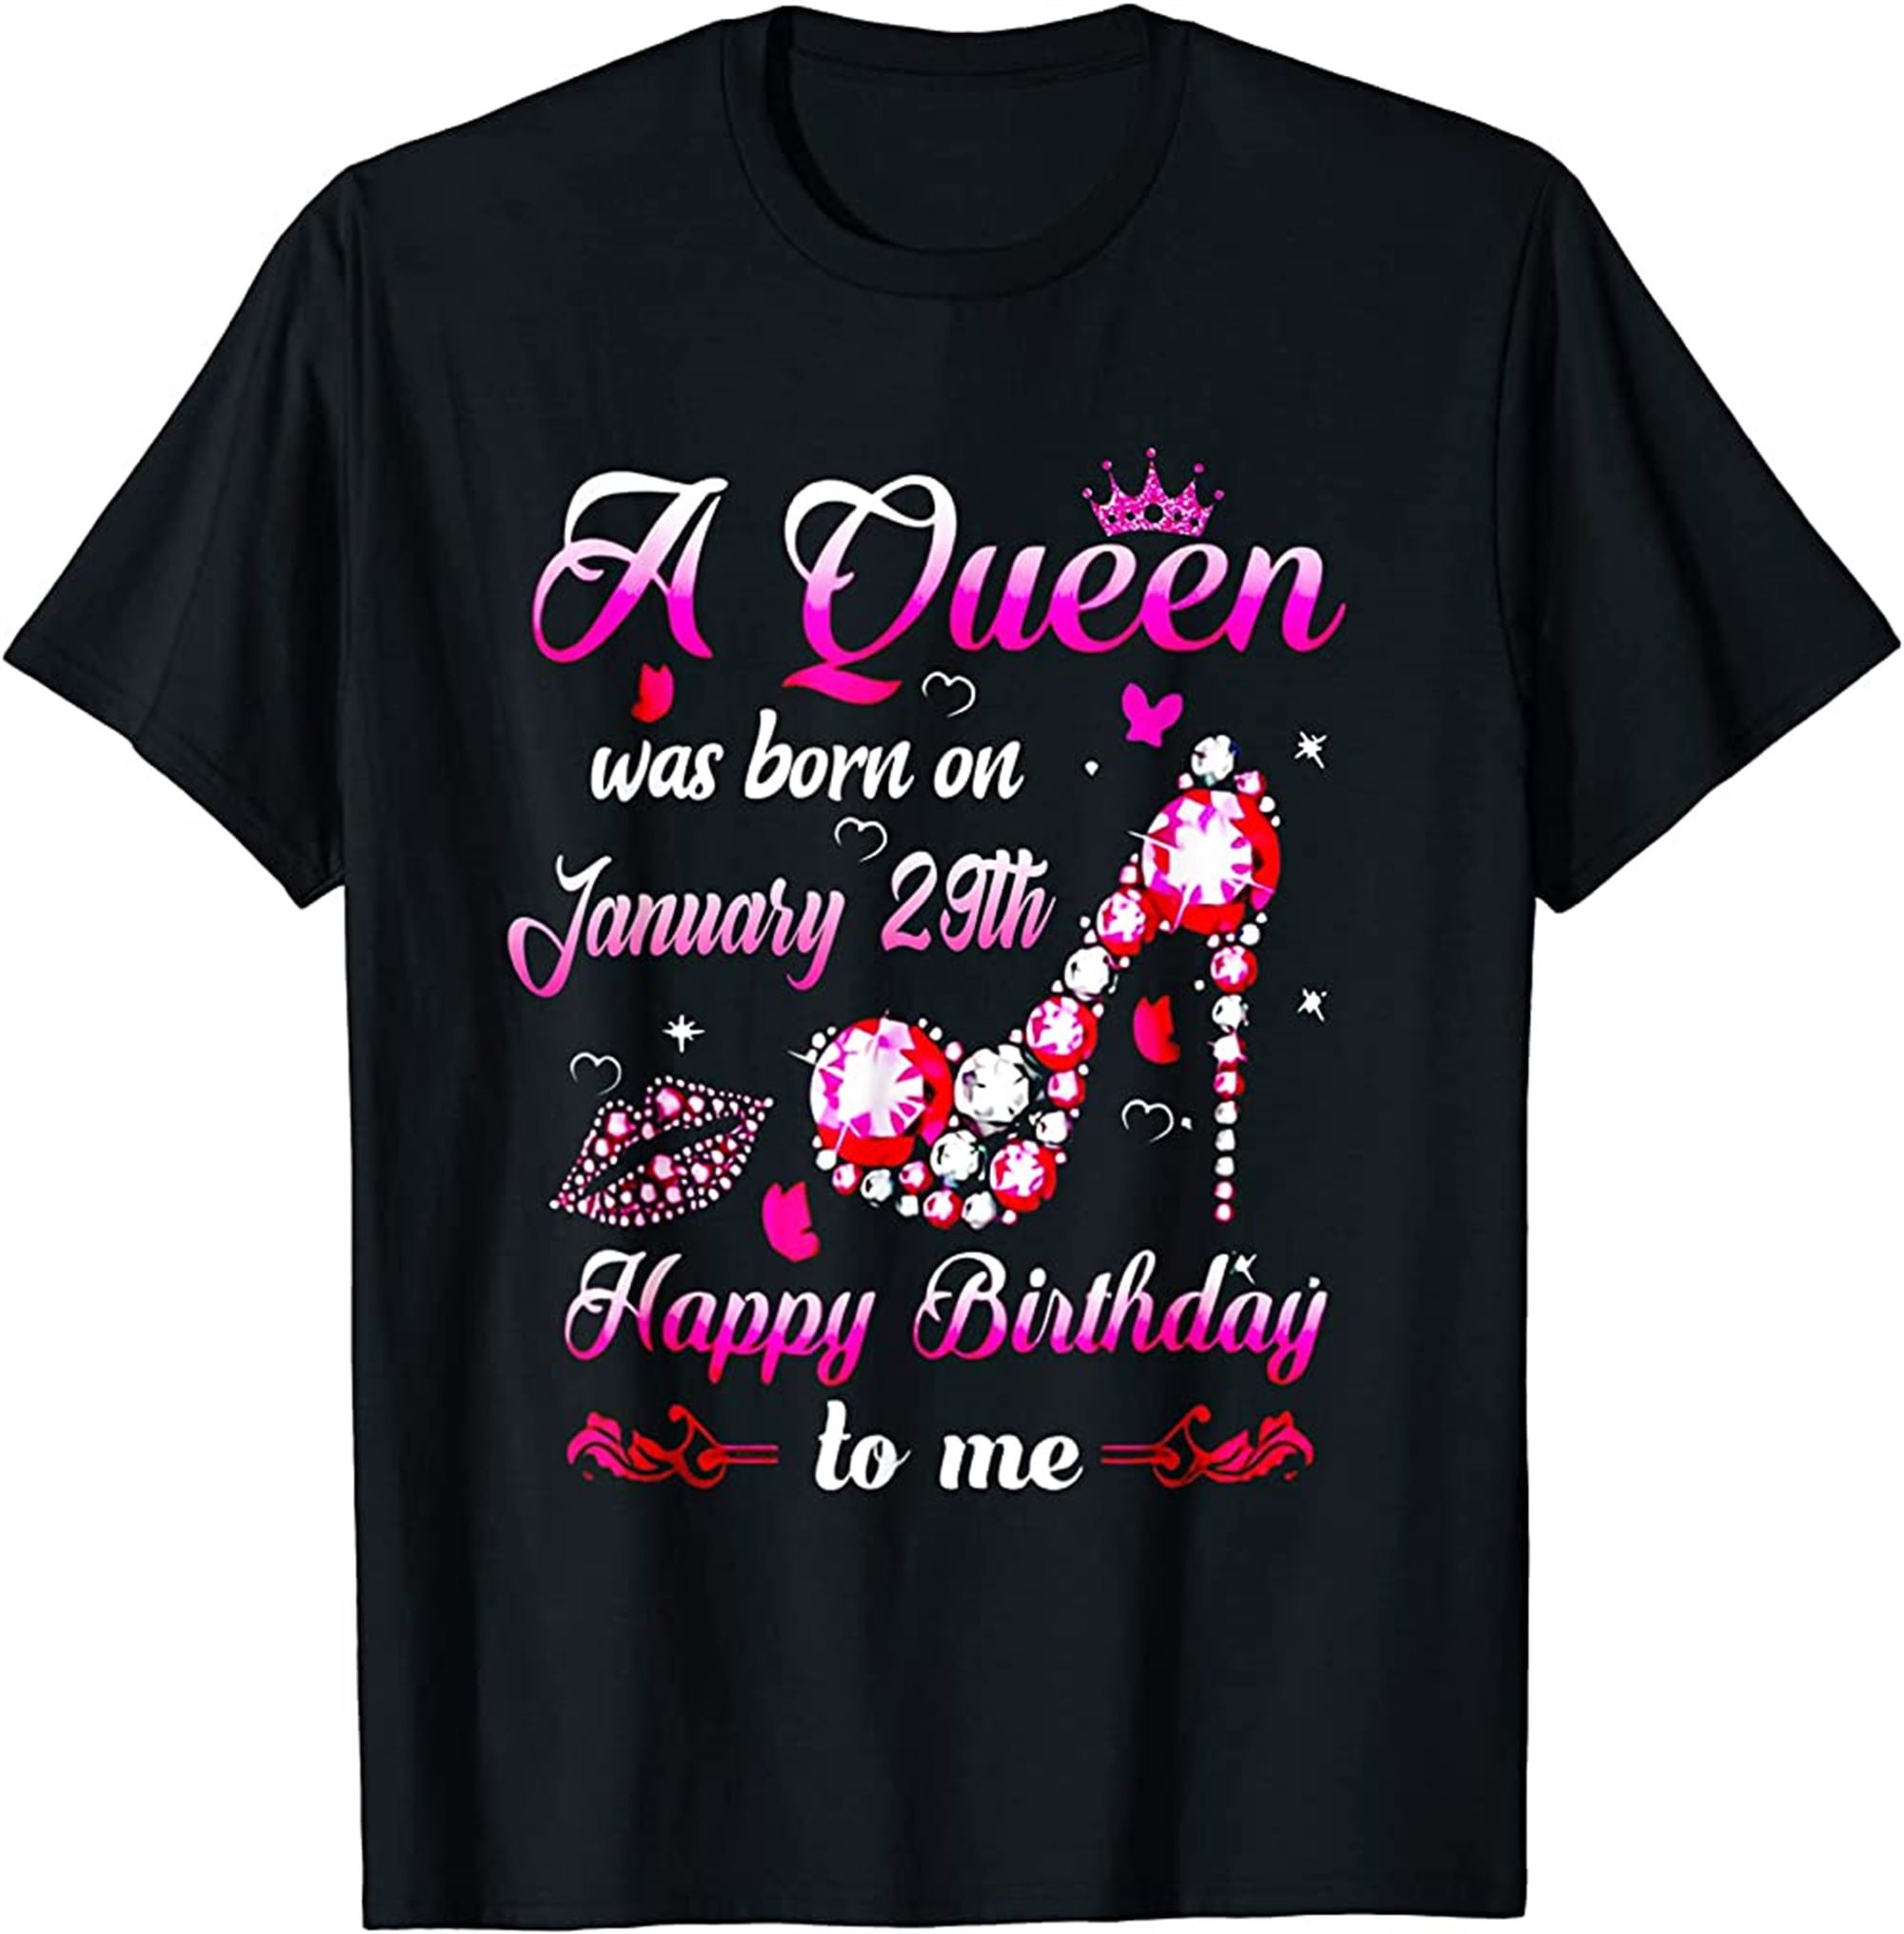 A Queen Was Born On January 29th Happy Birthday To Me T-shirt Size Up To 5xl